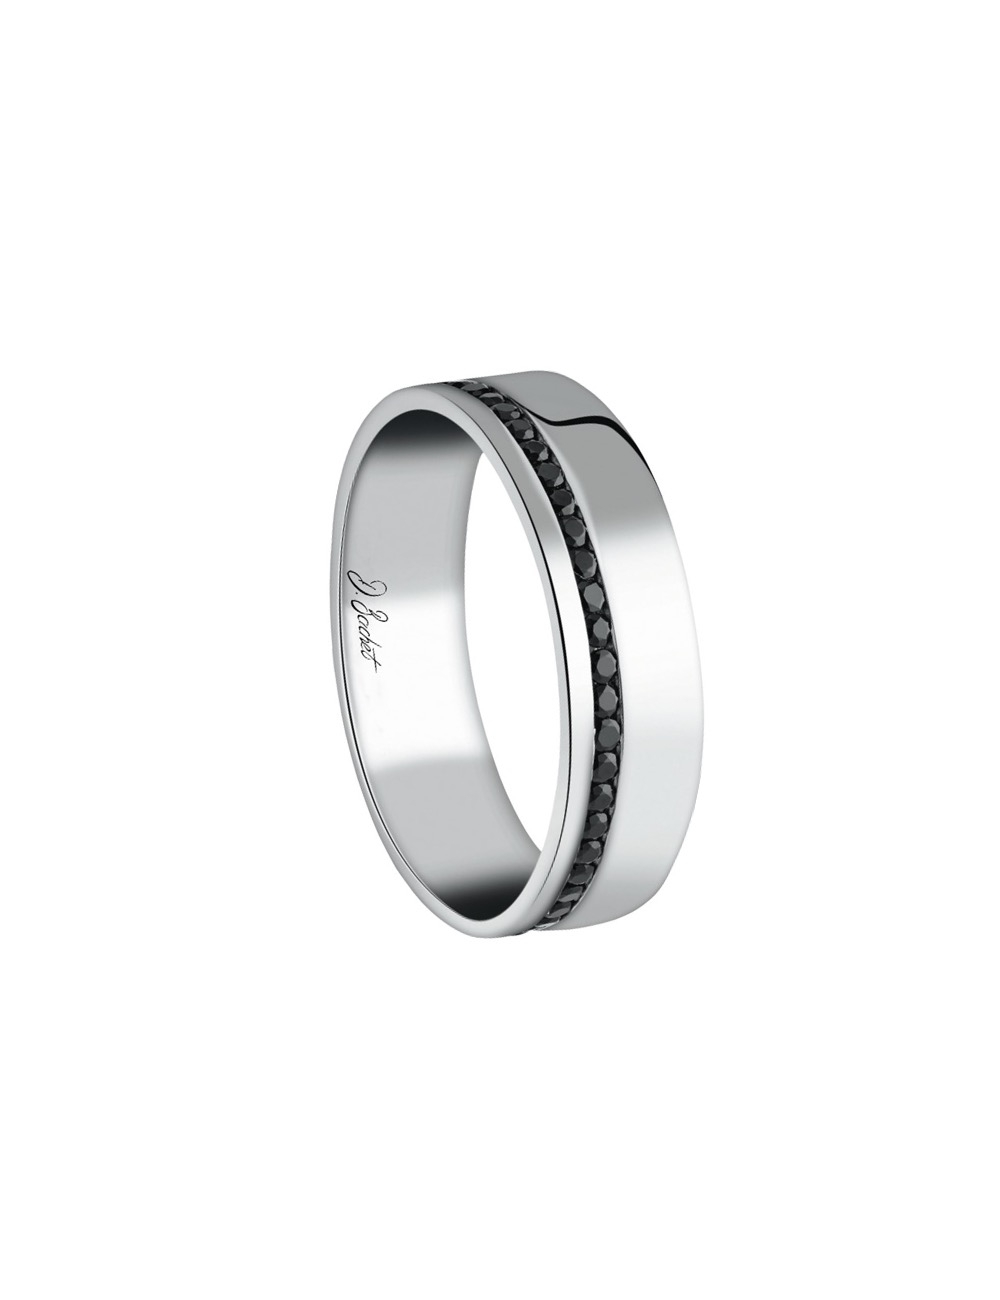 Modern men's wedding band, black diamonds, 6 mm in width, highlighted with platinum.